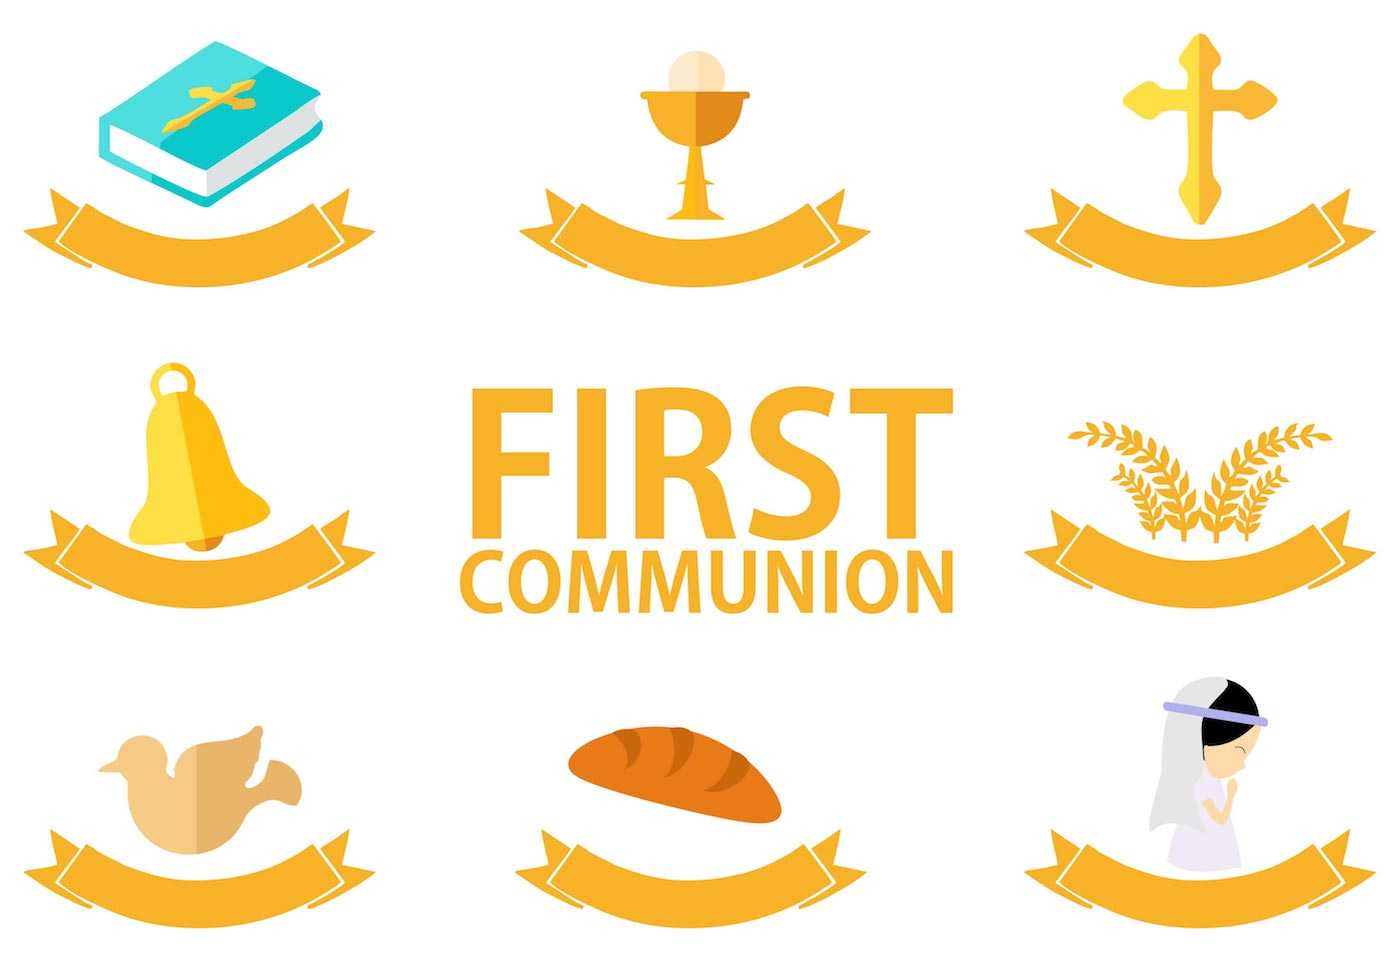 First Communion Template Free Vector Art – (25 Free Downloads) Inside First Communion Banner Templates